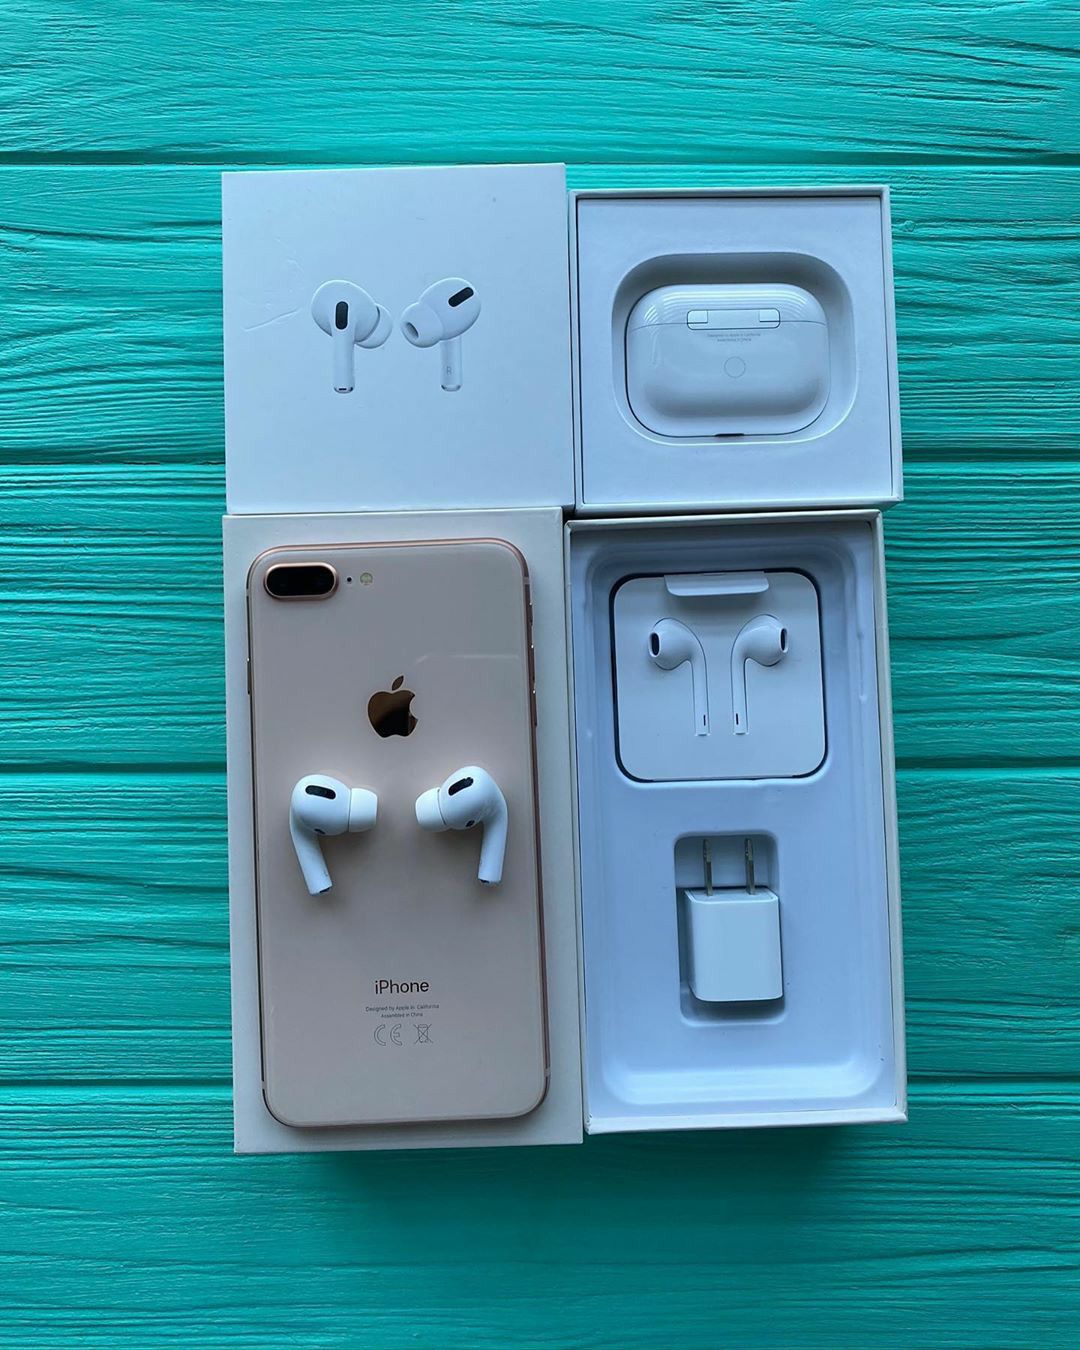 iPhone 8 plus with airpod pro